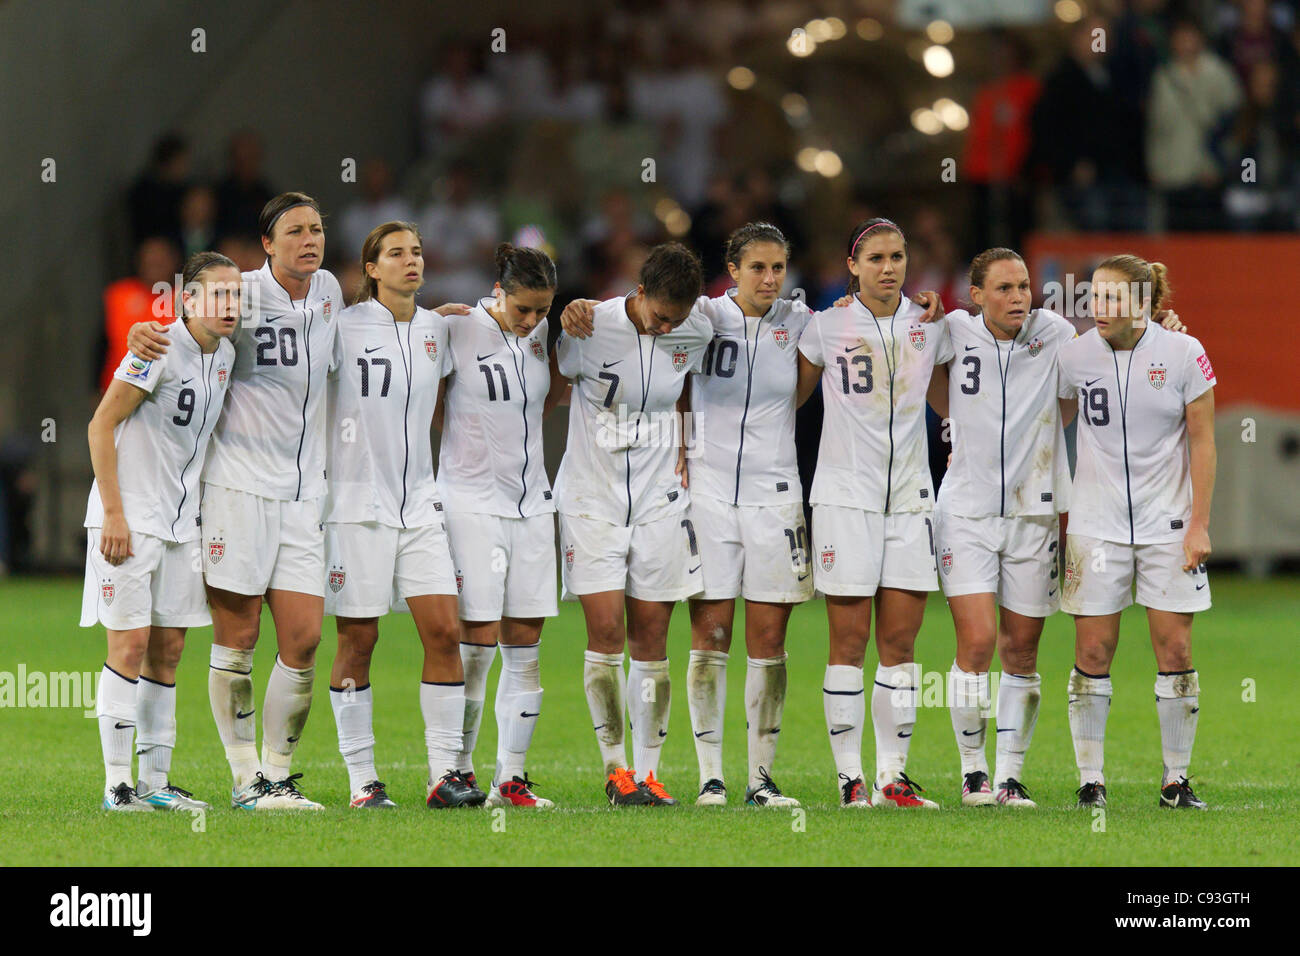 United States players stand together during the penalty kick shootout against Japan to determine the Women's World Cup champion. Stock Photo